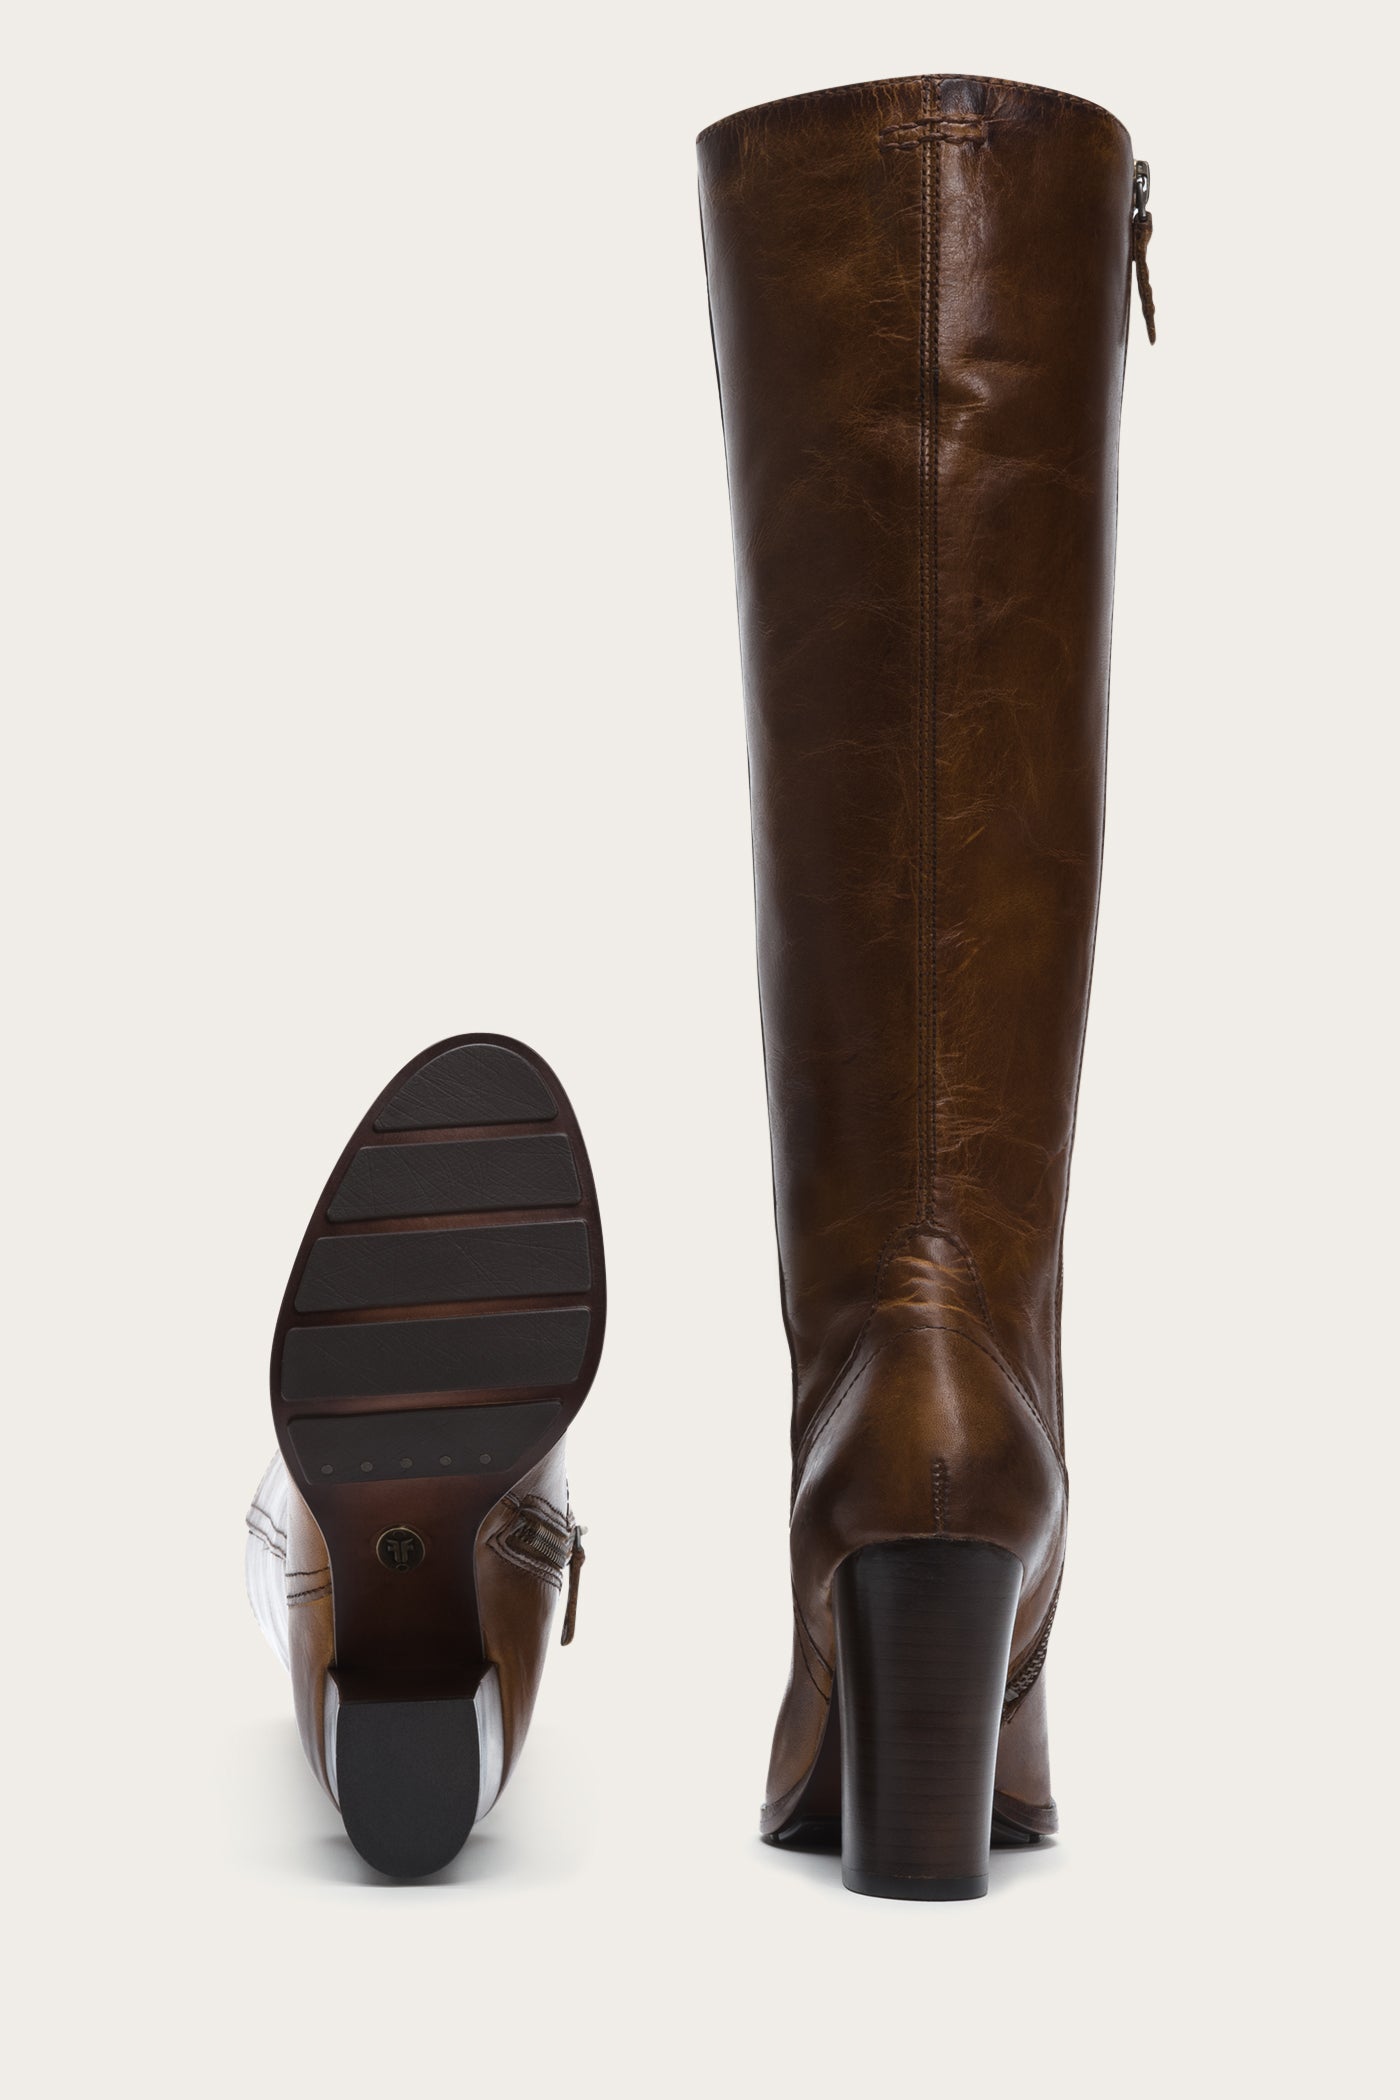 frye parker tall boots